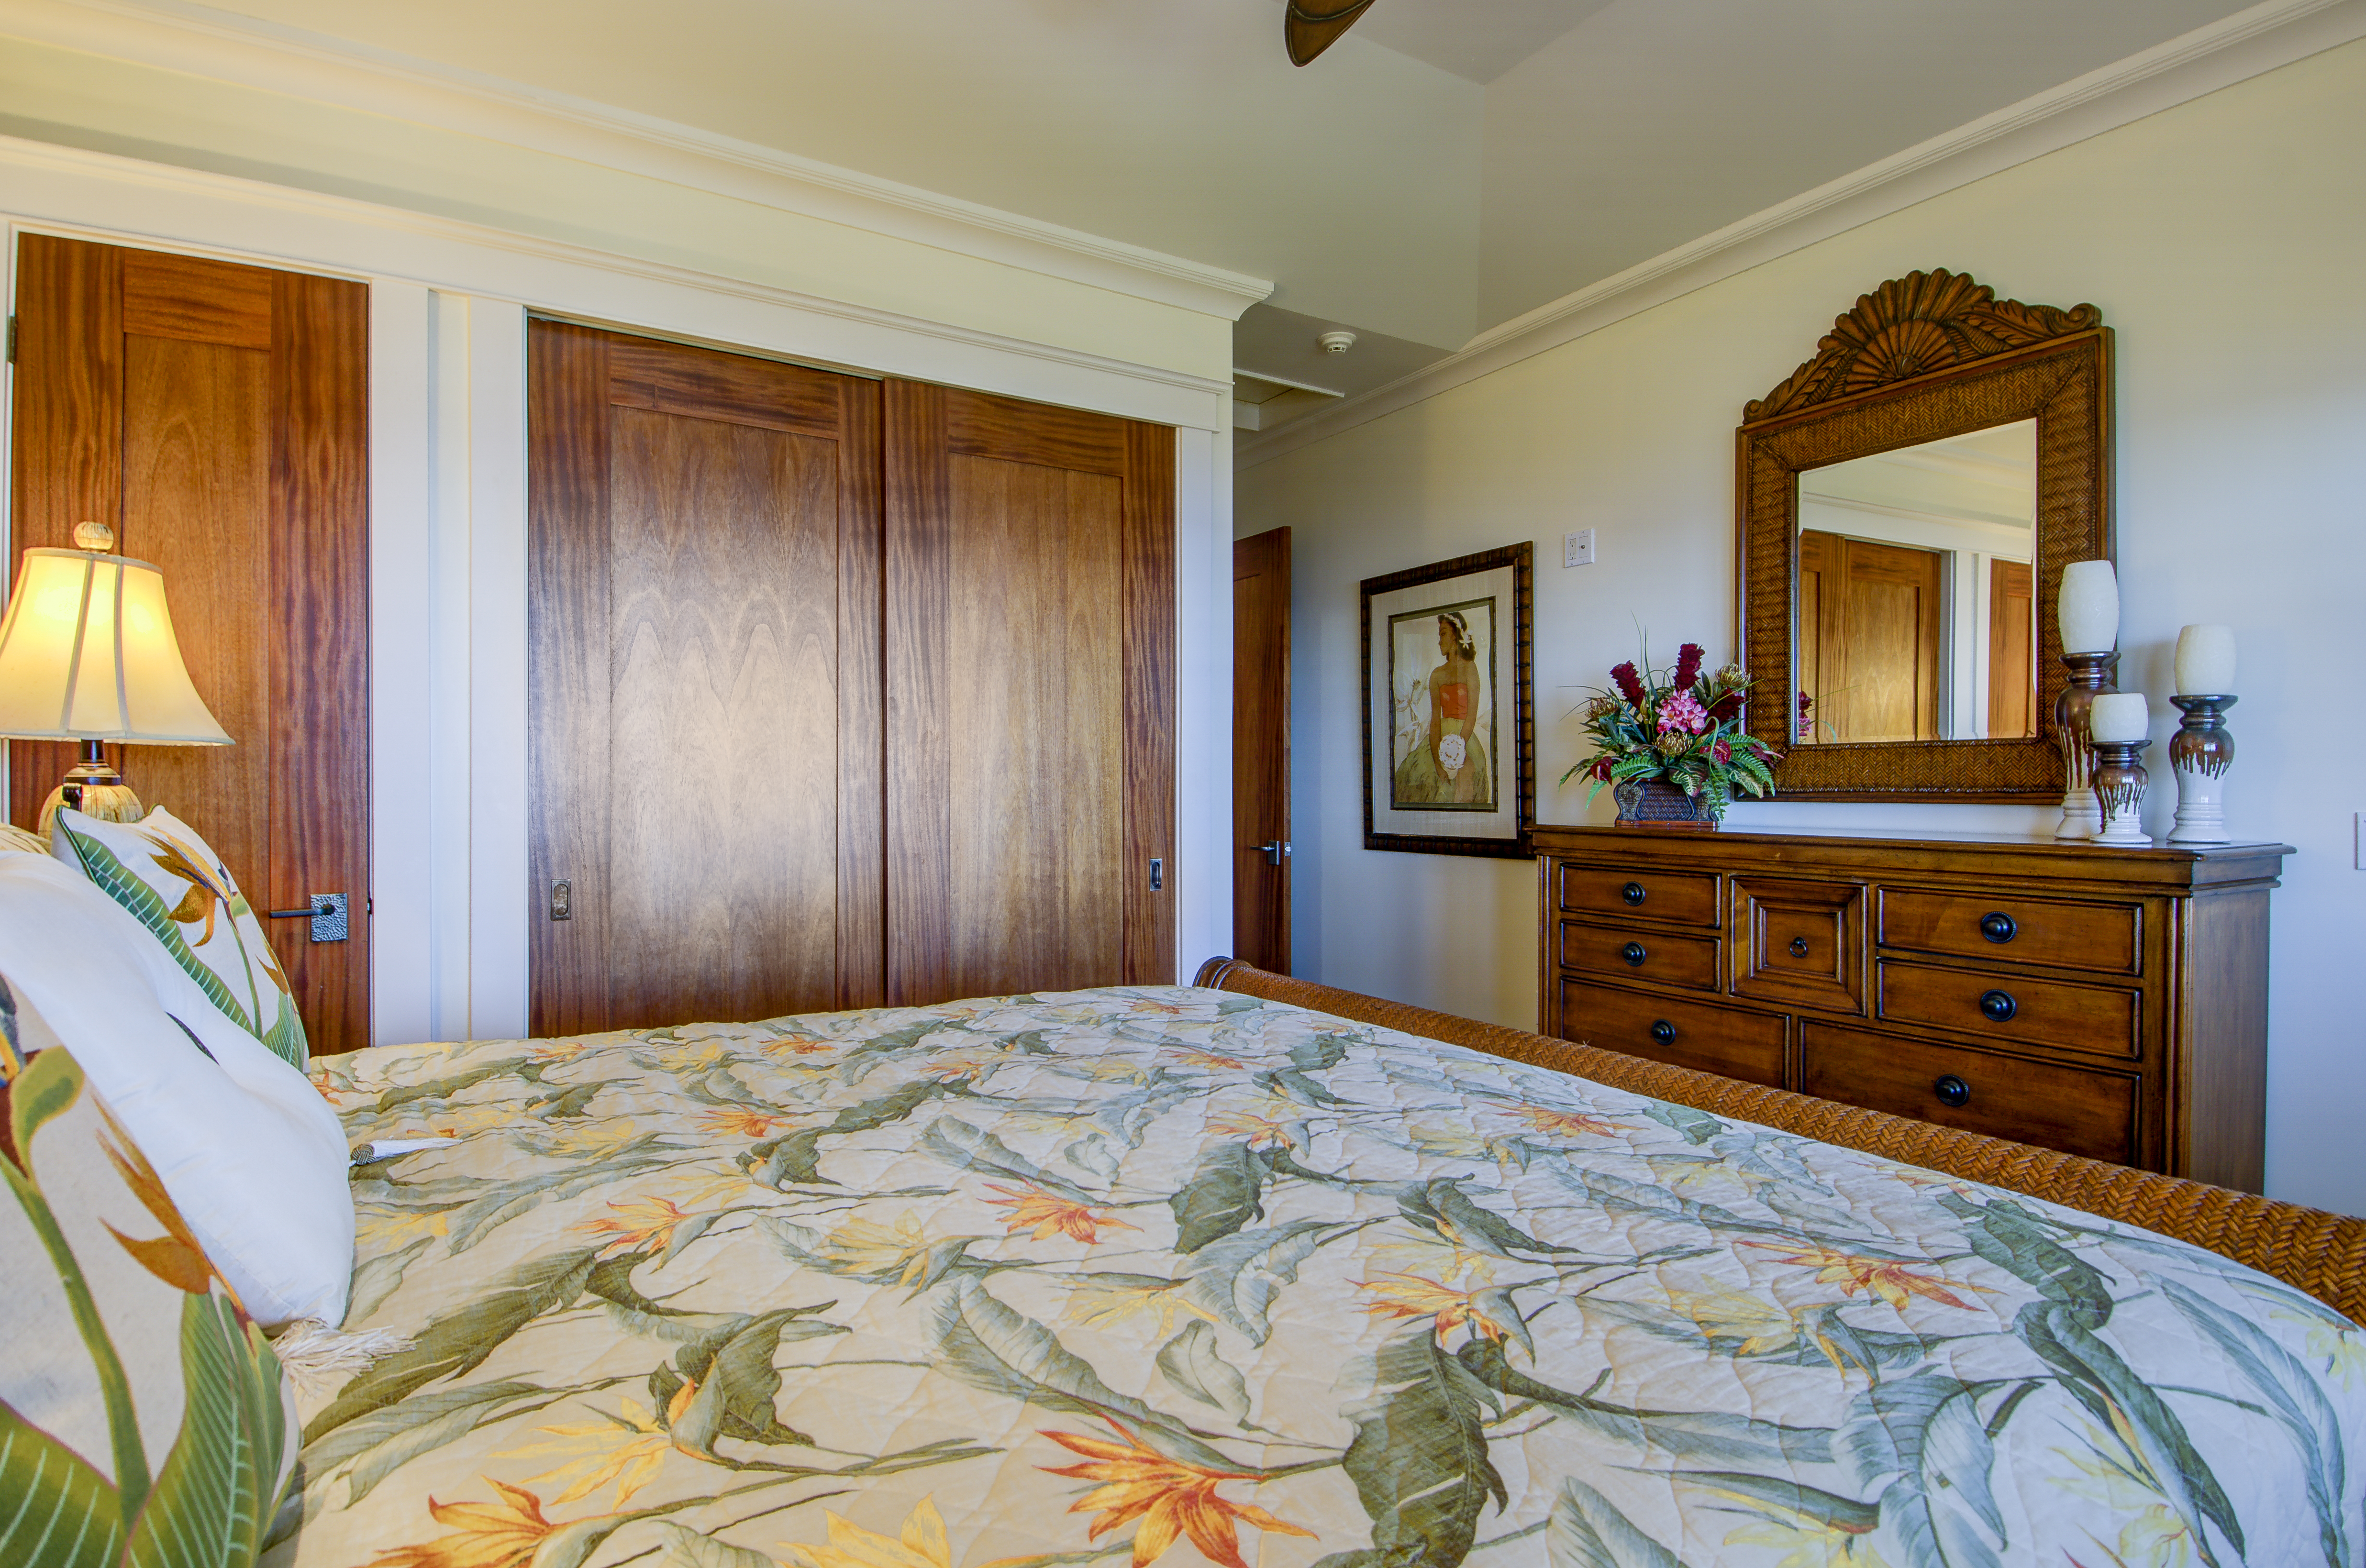 Honu La'e's second bedroom with king bed, featuring deep wood furniture and accents.